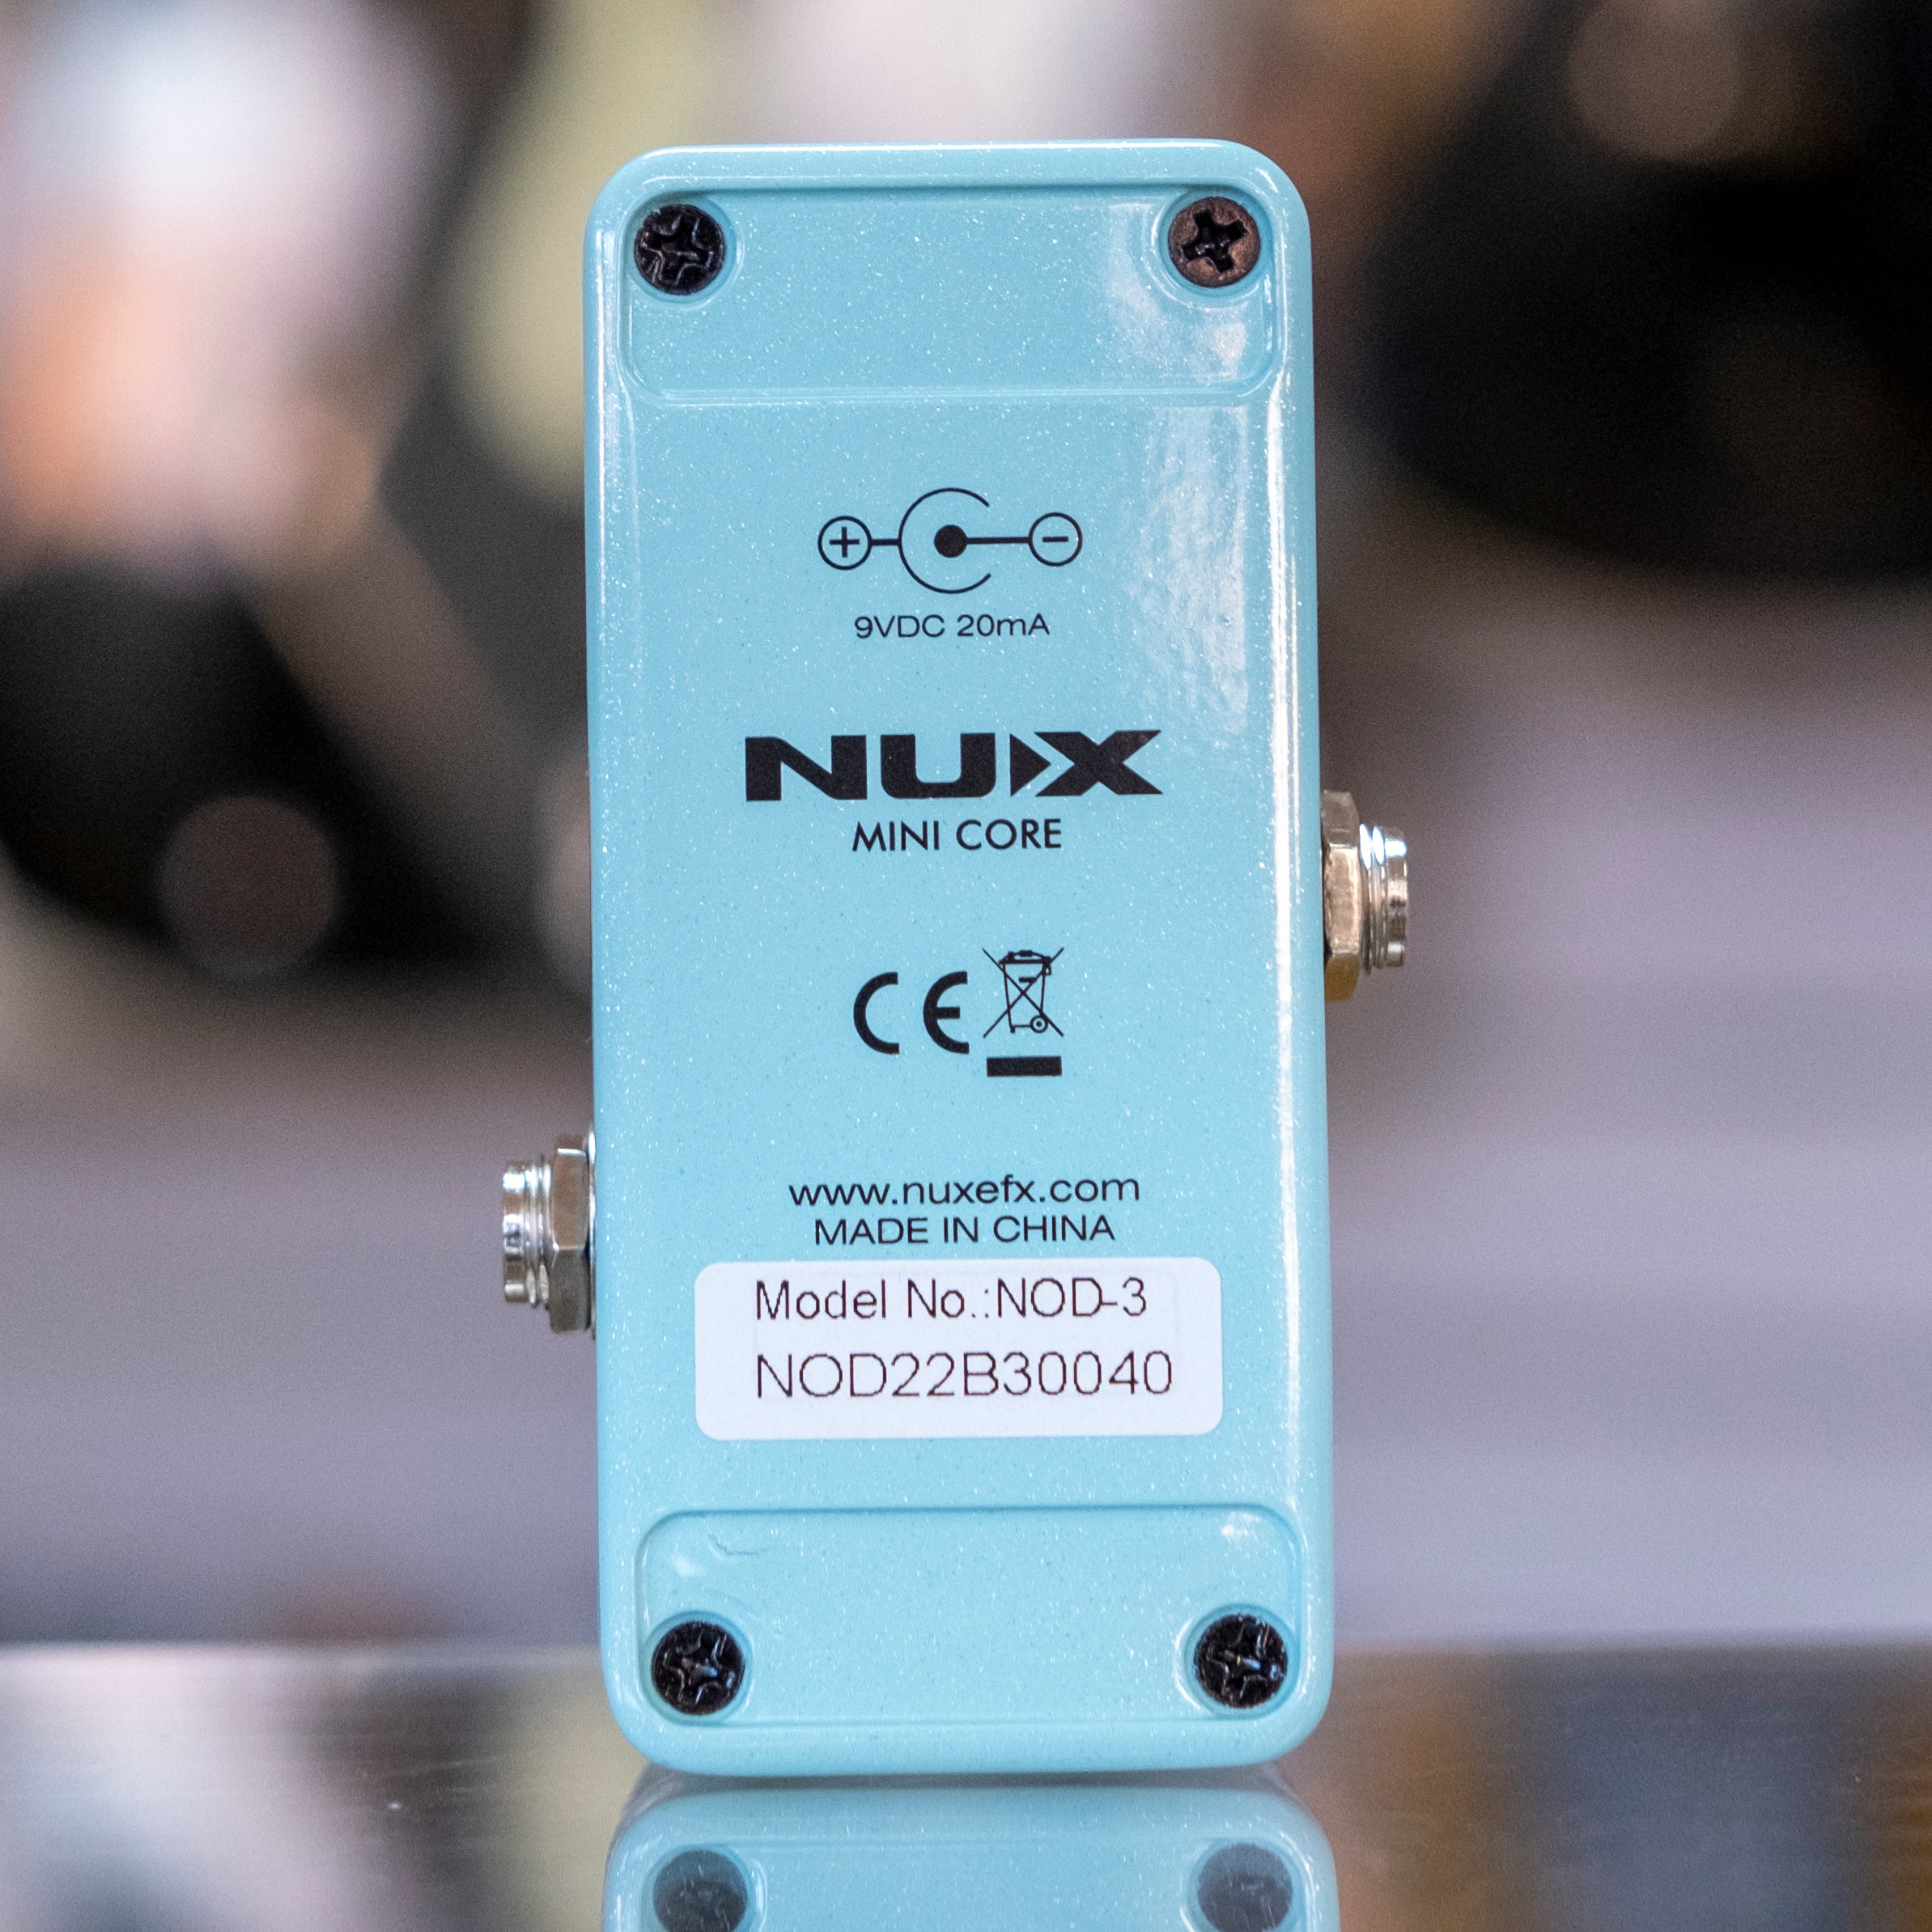 NUX Mini Core Series Morning Star Overdrive Pedal